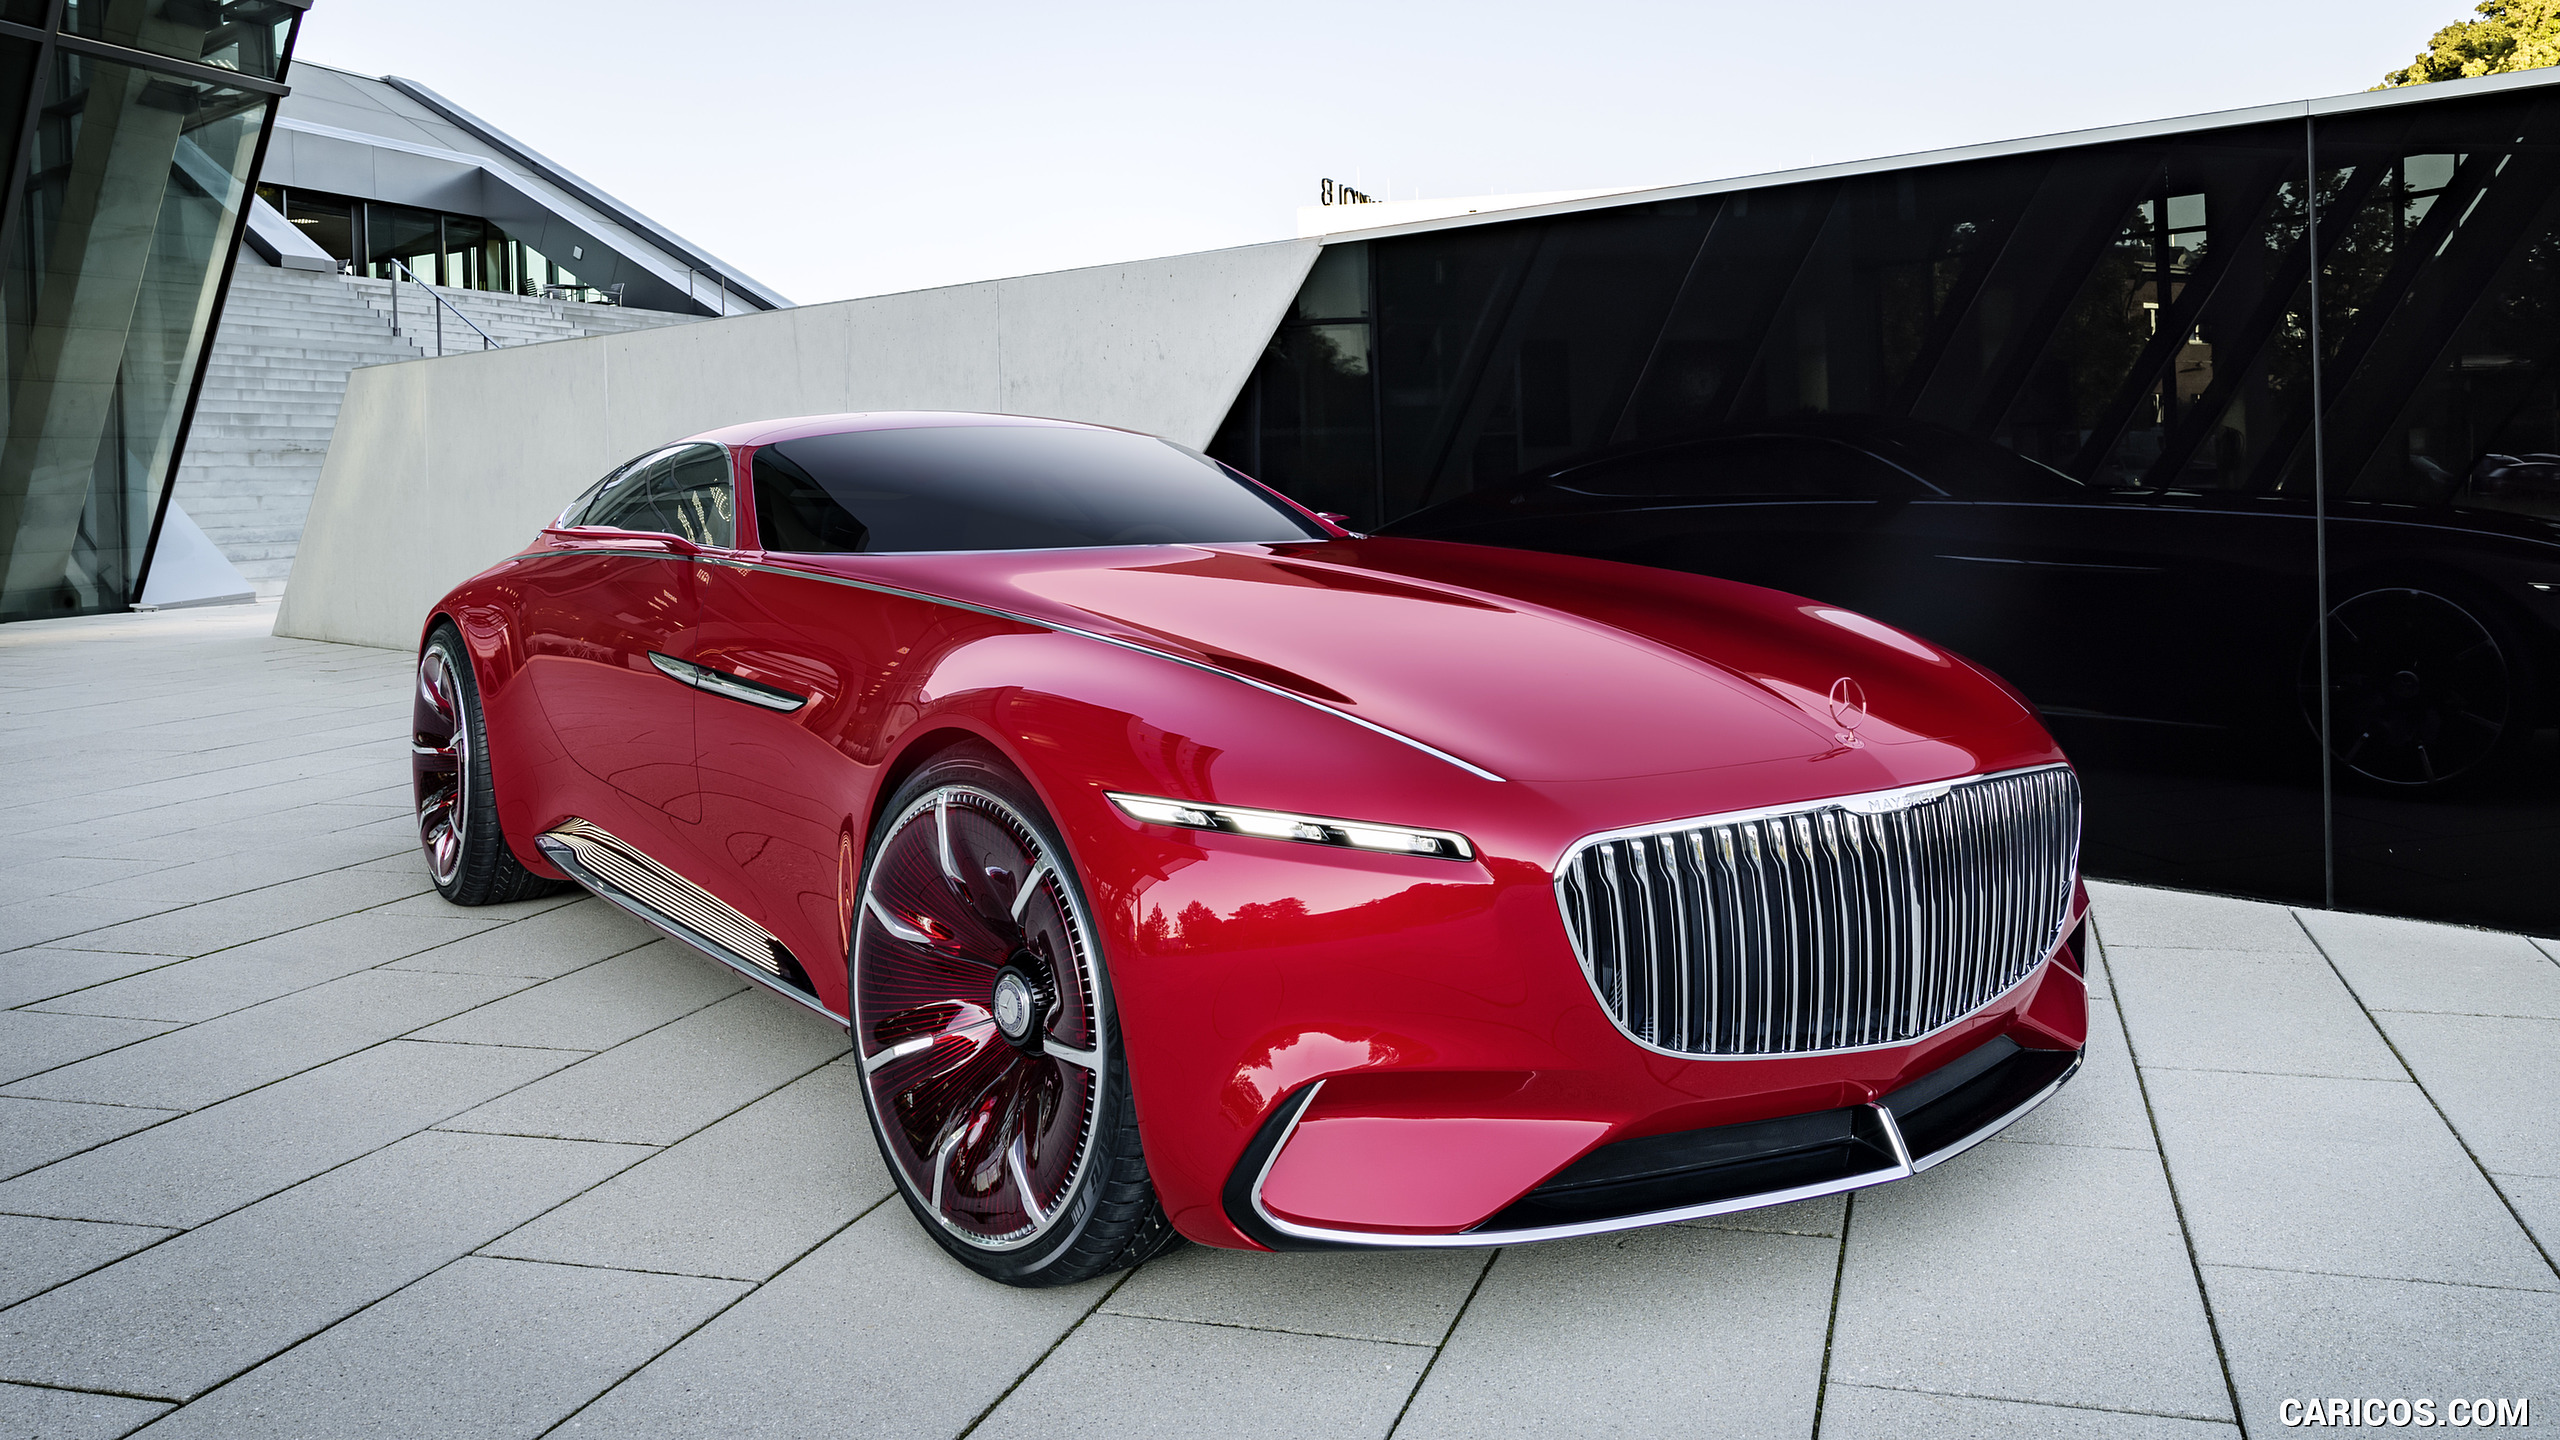 2016 Mercedes-Maybach 6 Concept - Front, #28 of 31